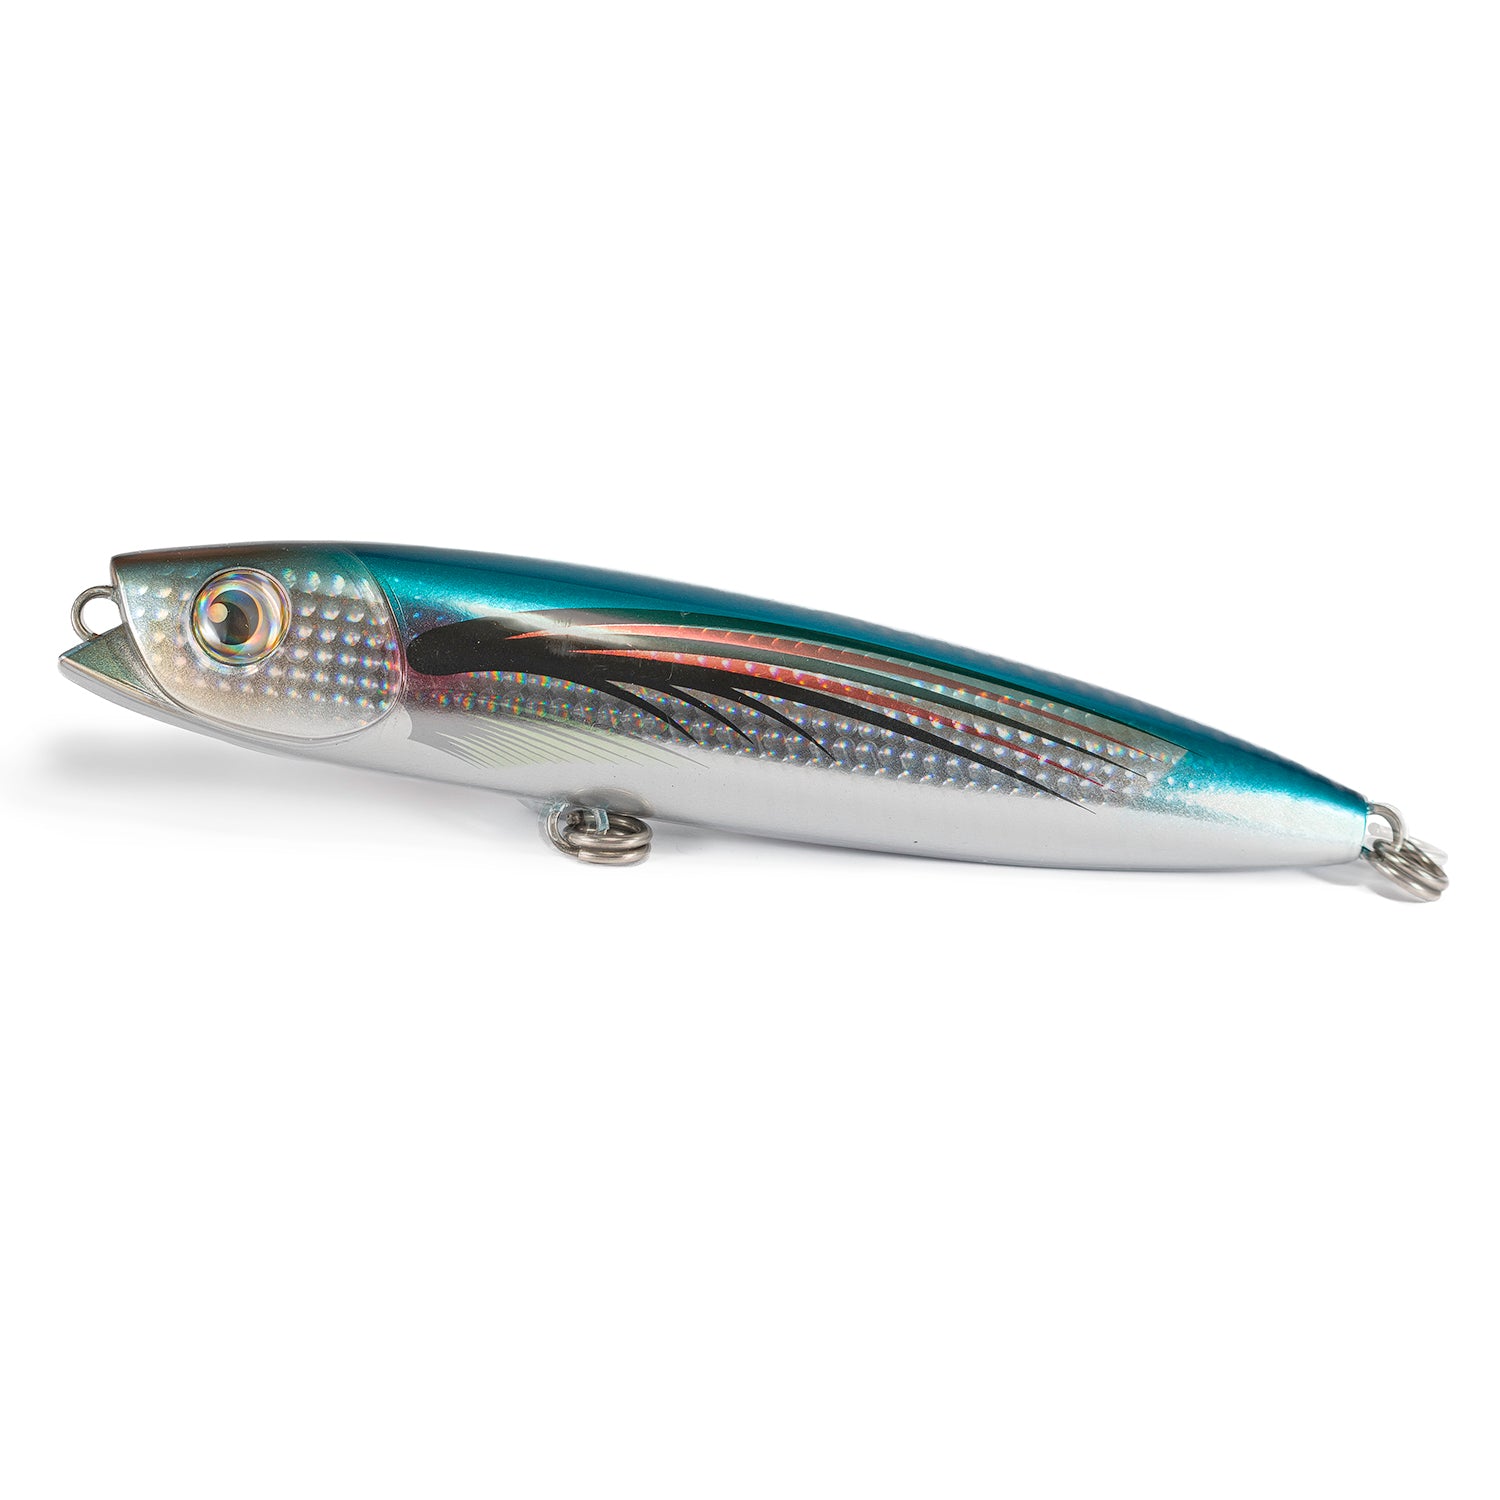 Evergreen True-Diver 170F - Compleat Angler Nedlands Pro Tackle